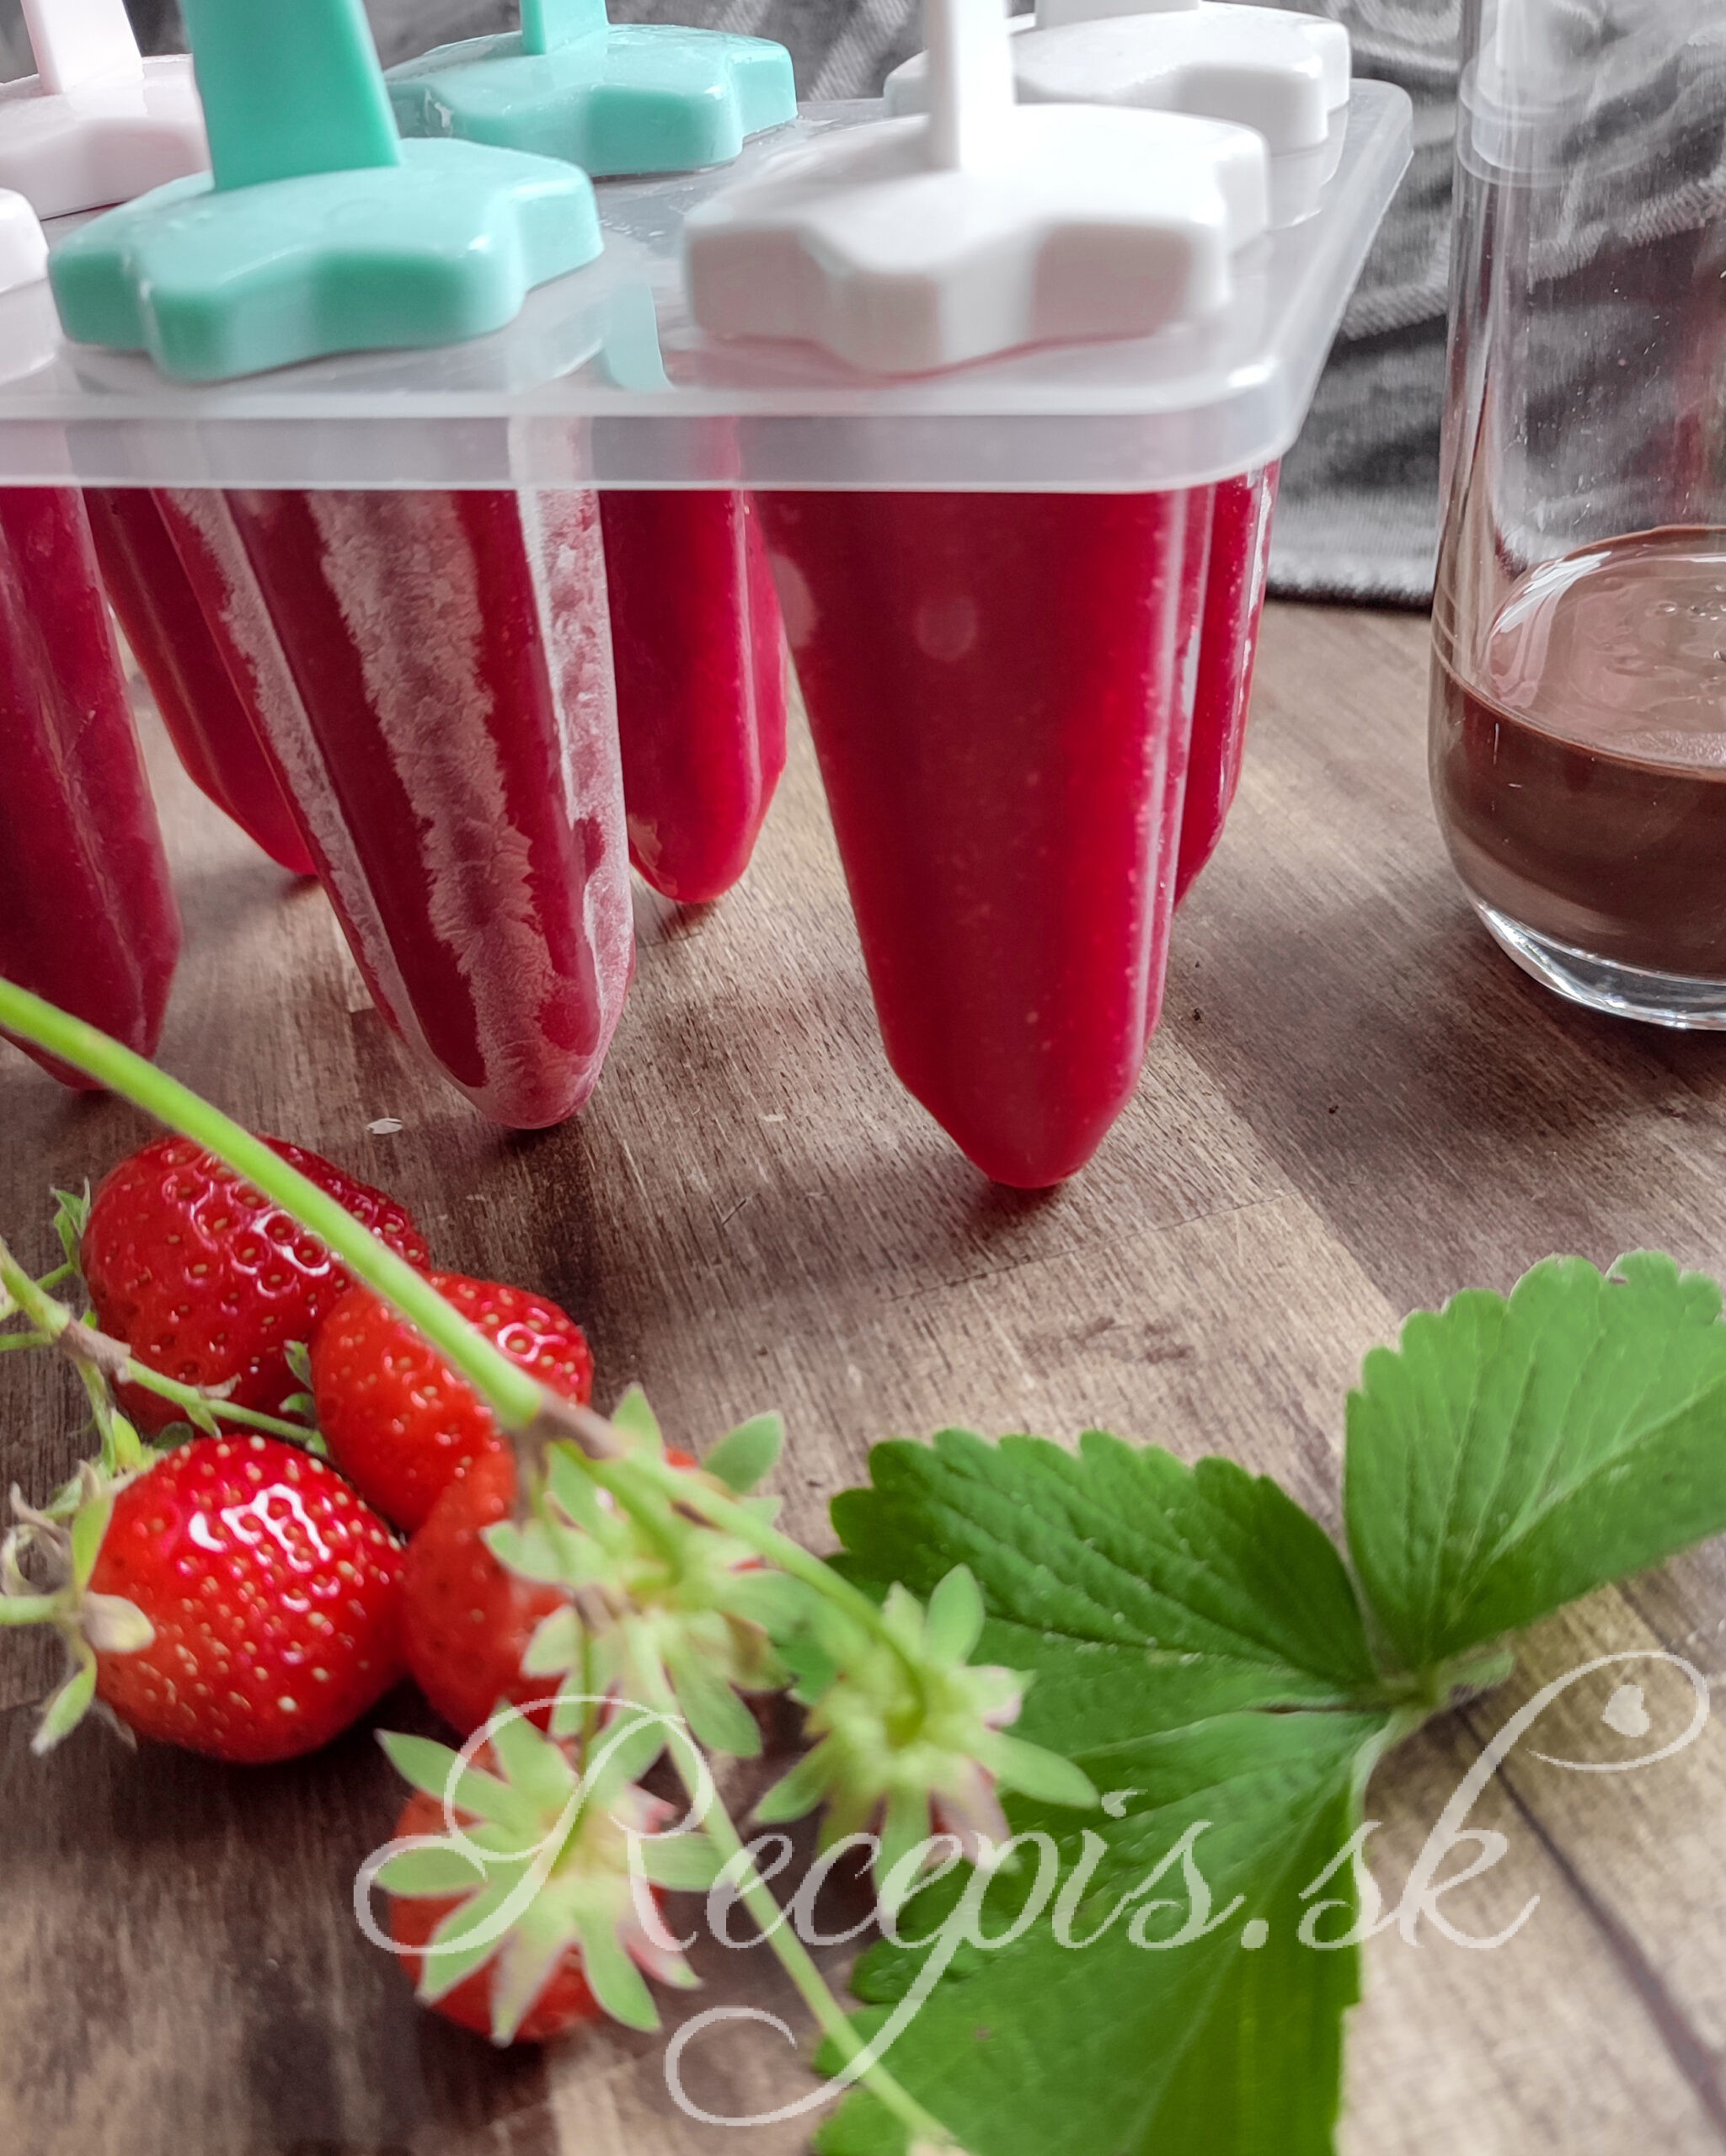 Healthy strawberry popsicle made from homemade strawberries